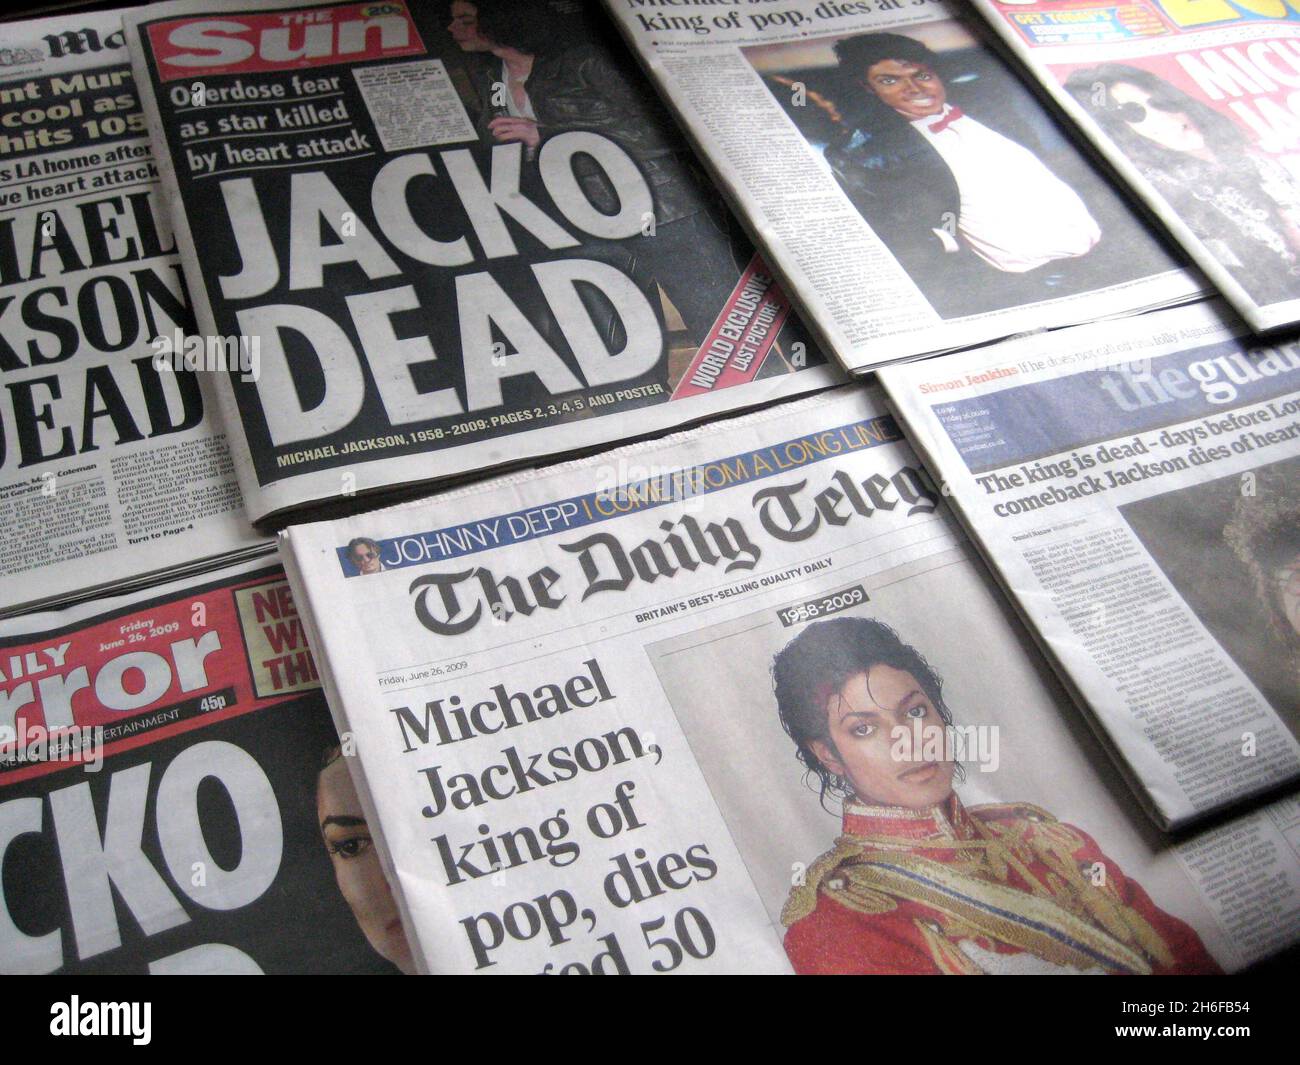 MICHAEL JACKSON "Daily Express" 26th June 2009-7 pages reporting singers death 